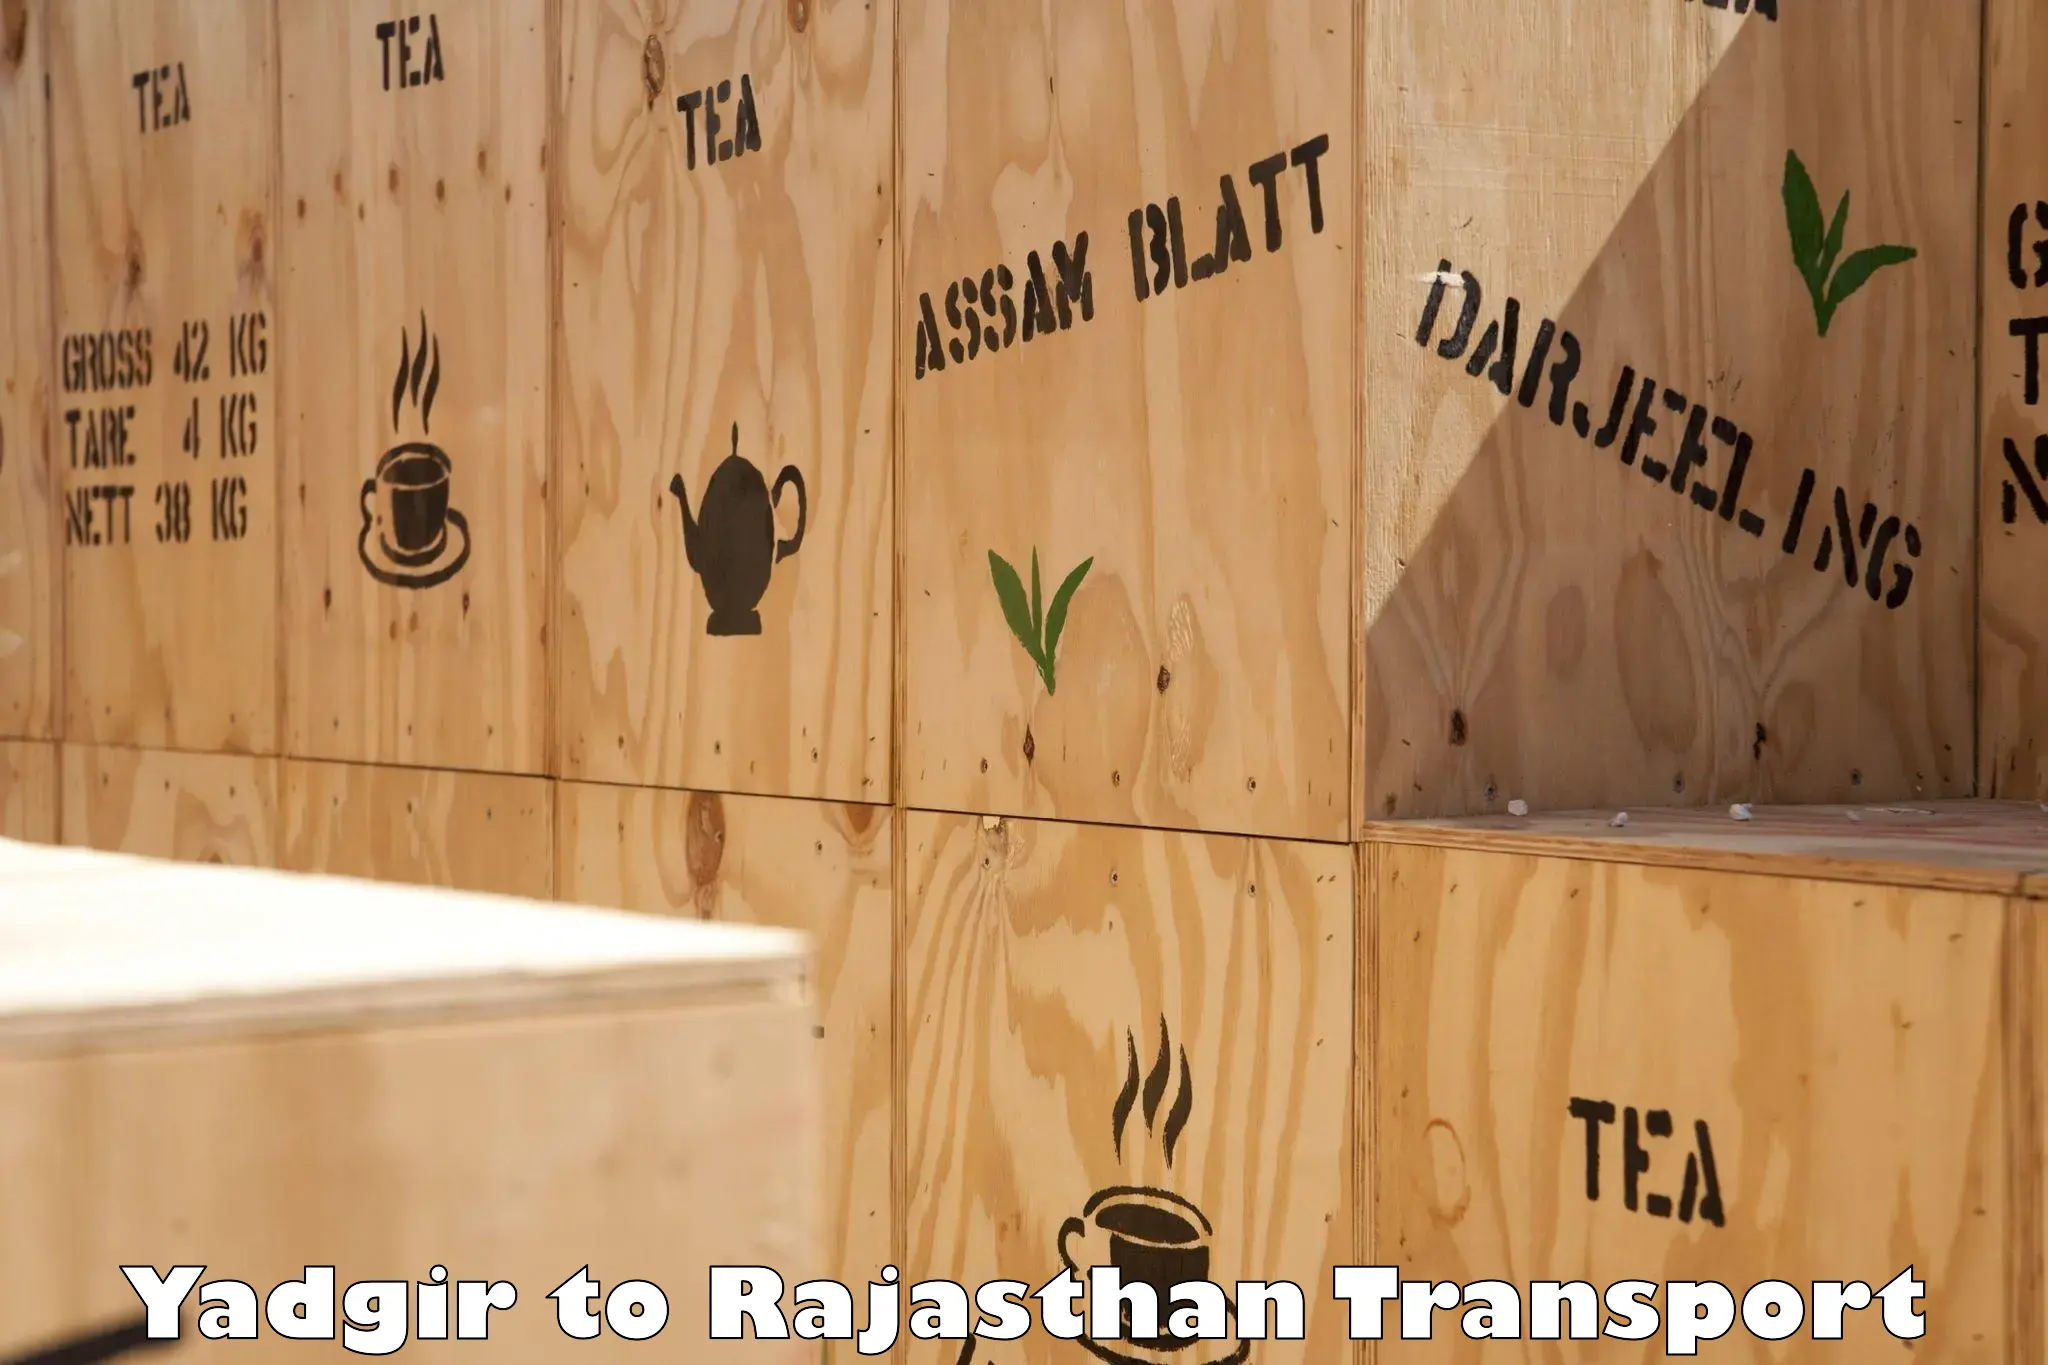 Container transport service Yadgir to Rajasthan